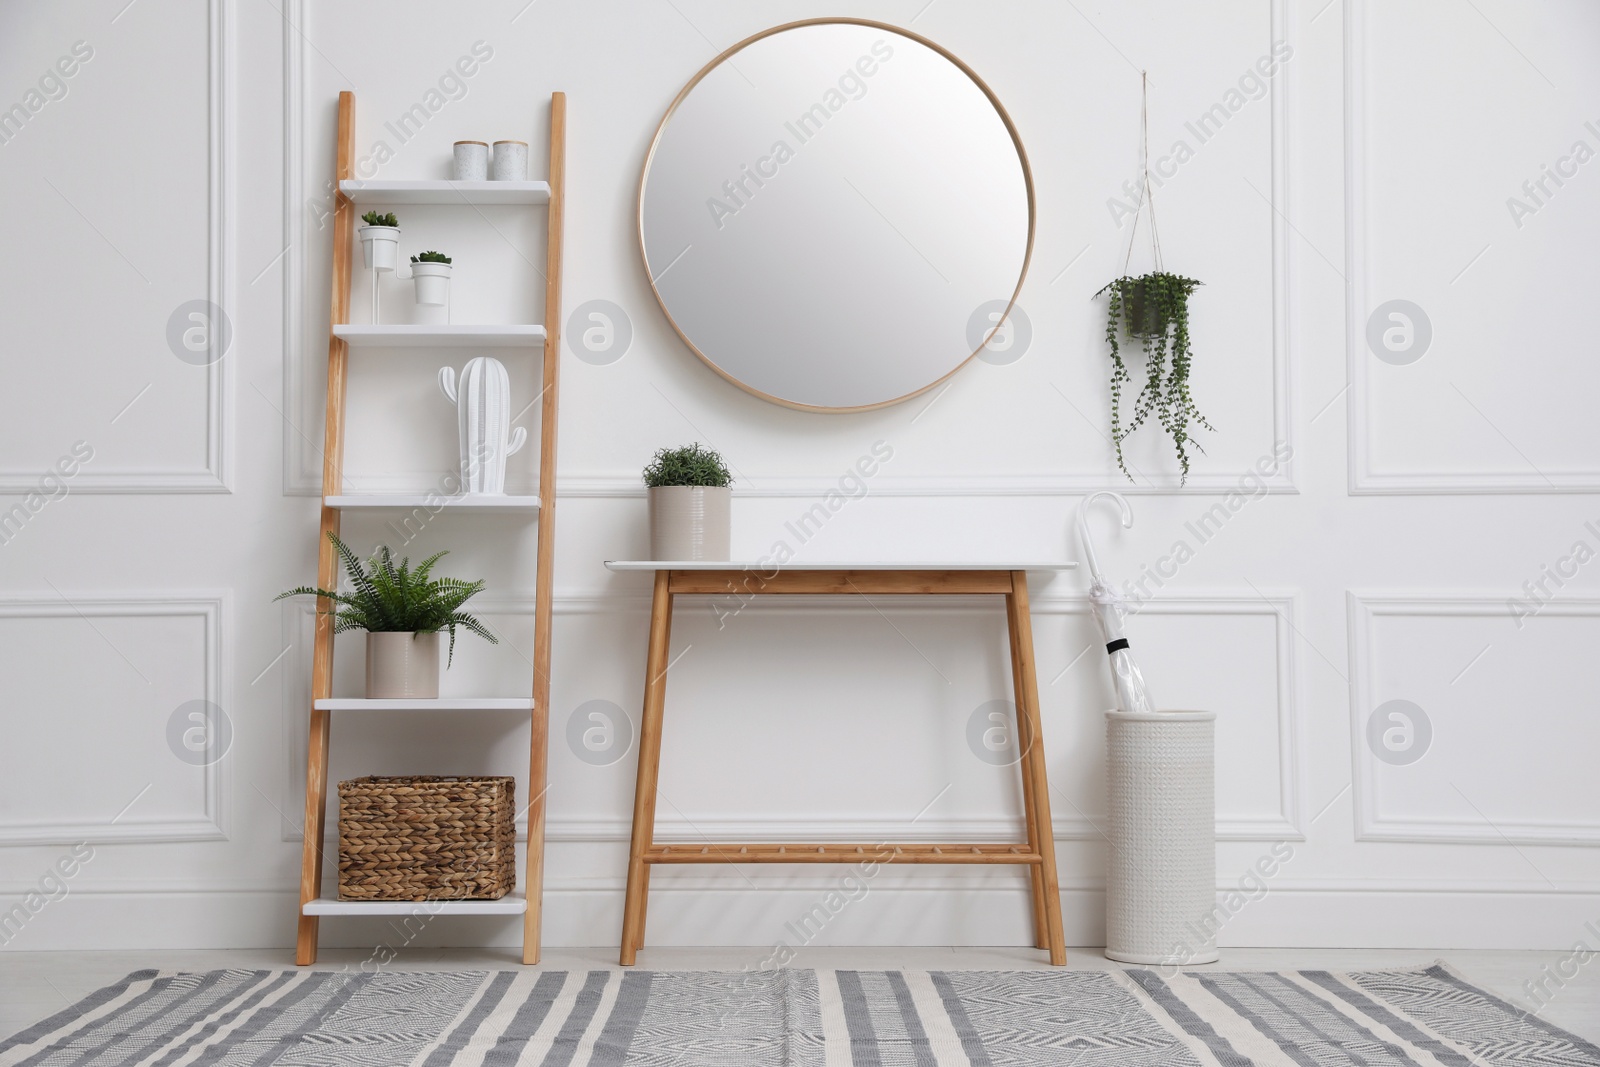 Photo of Console table with shelving unit and mirror on white wall in hallway. Interior design